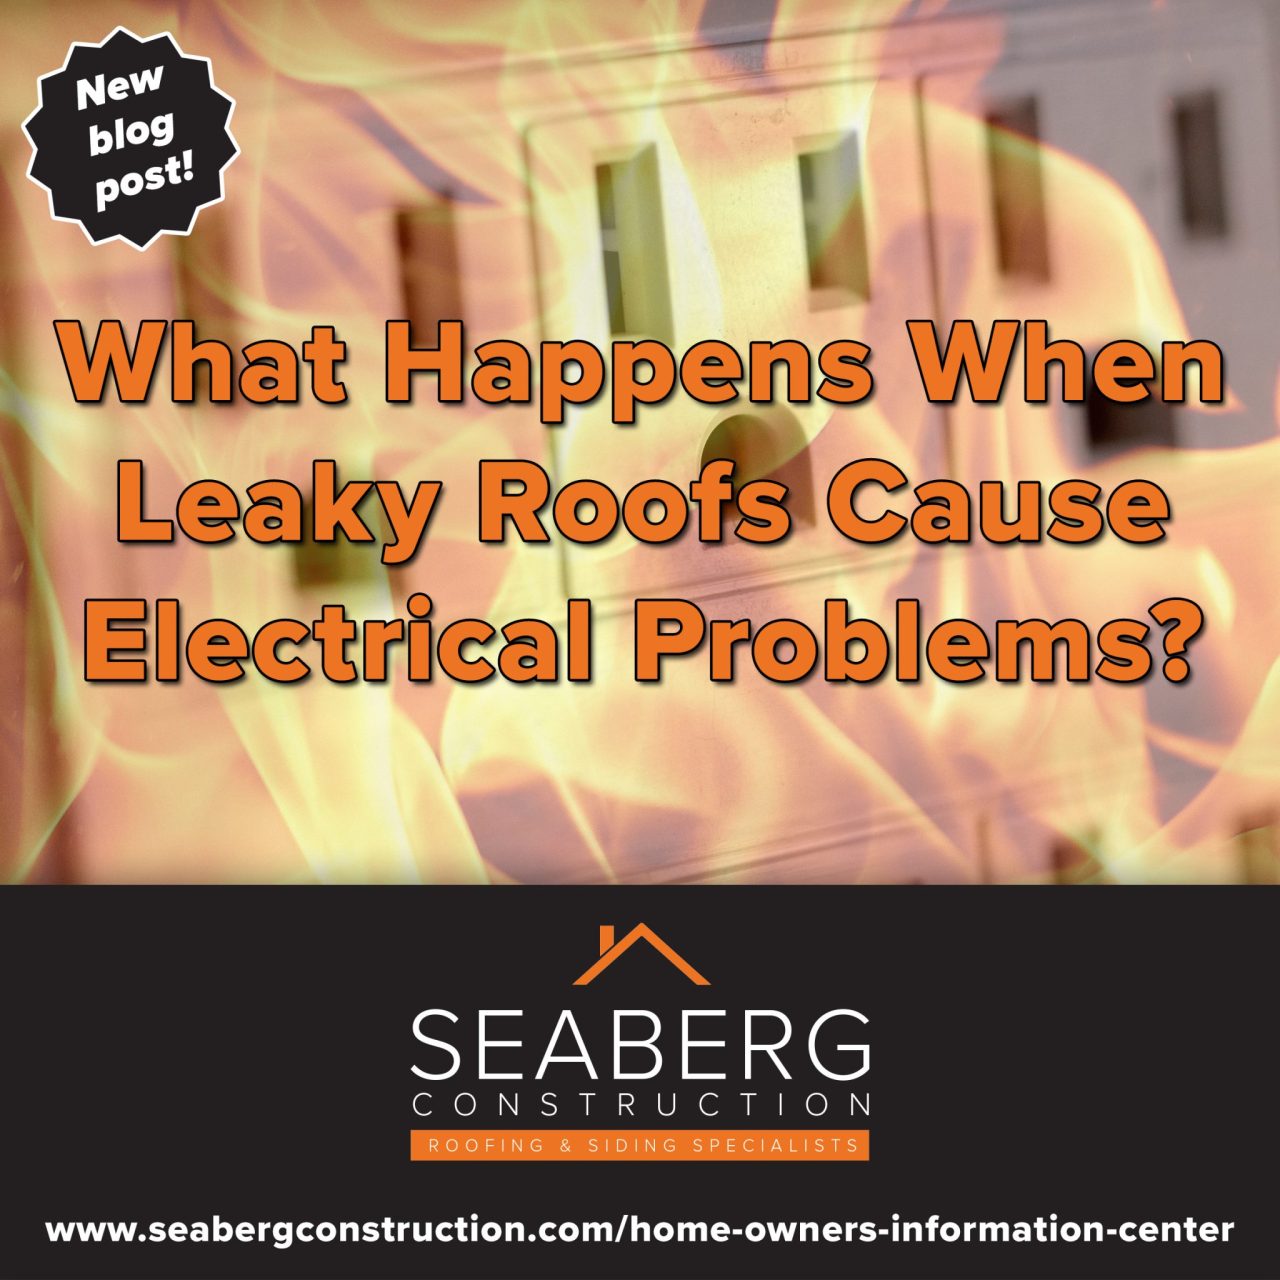 SeabergConstructionBlog_WhatHappensWhenLeakyRoofsCauseElectricalProblems-1-2048x2048